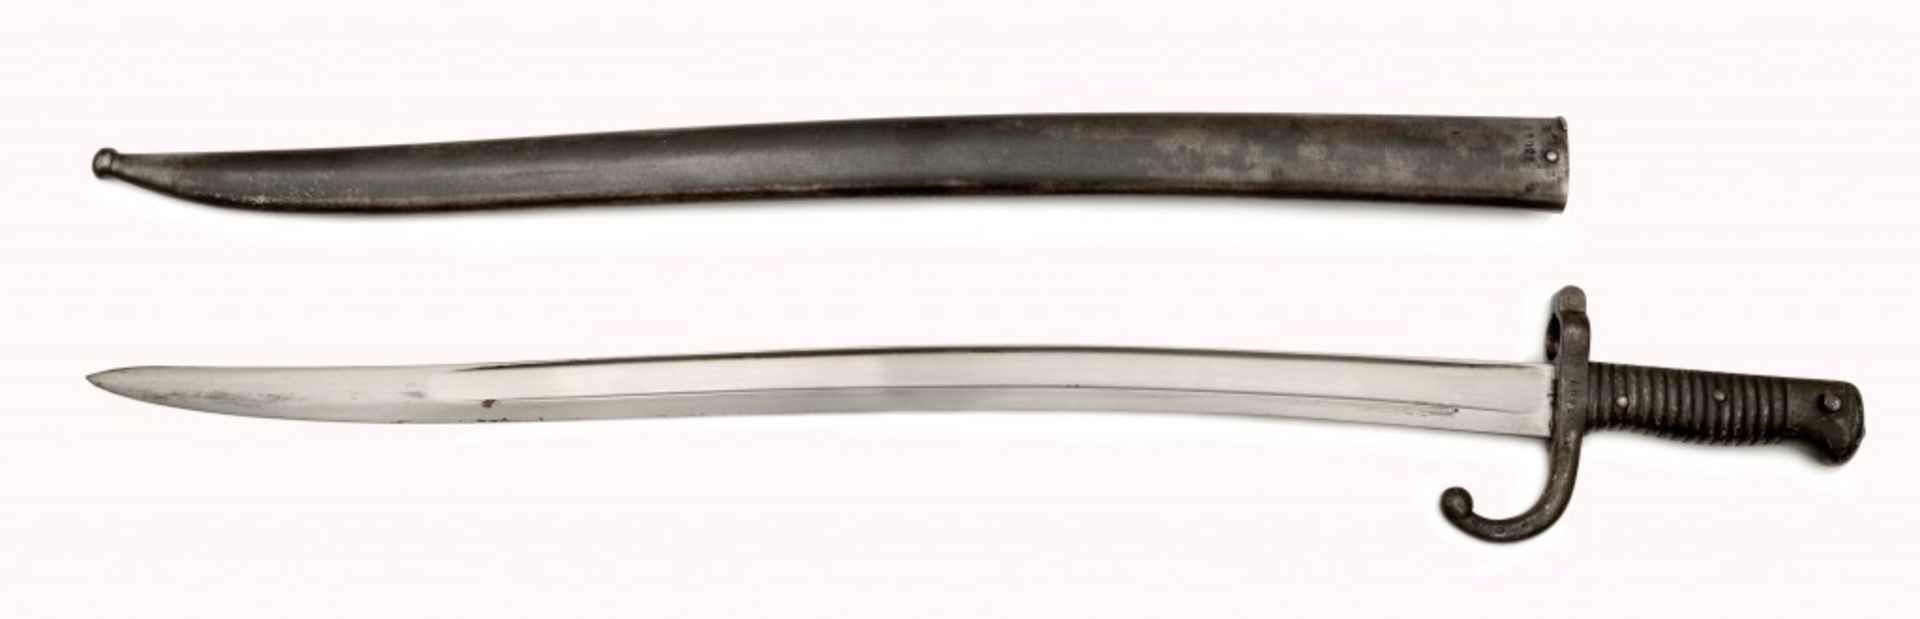 A Sword Bayonet for Chassepot Rifle Model 1866